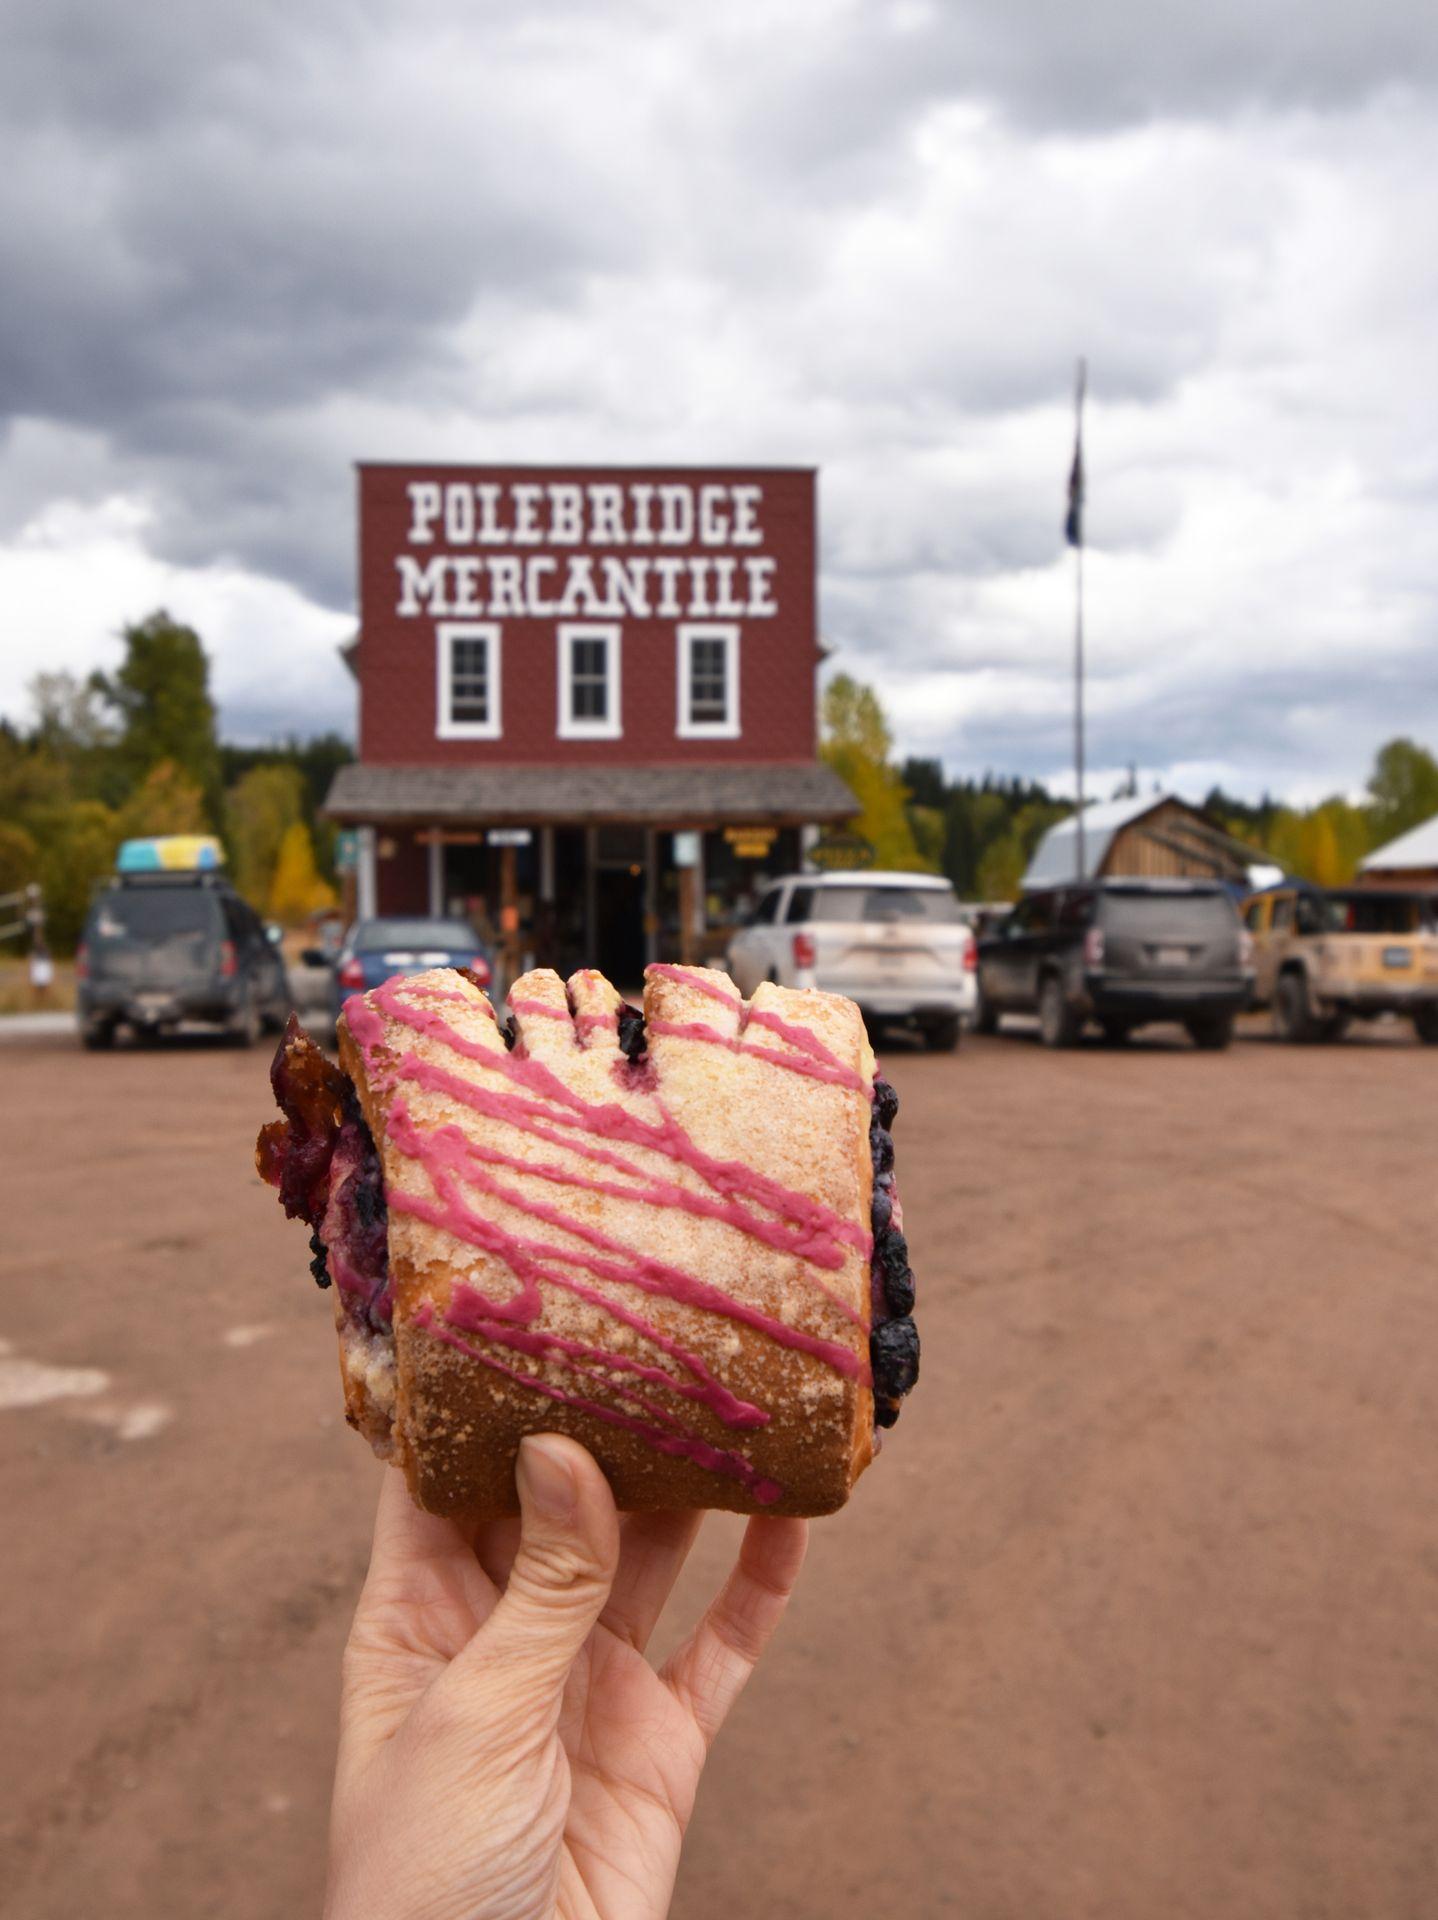 Holding up a huckleberry bearclaw in front of Polebridge Mercantile. The bearclaw has purple icing and Polebridge Mercantile is a red building with white letters.